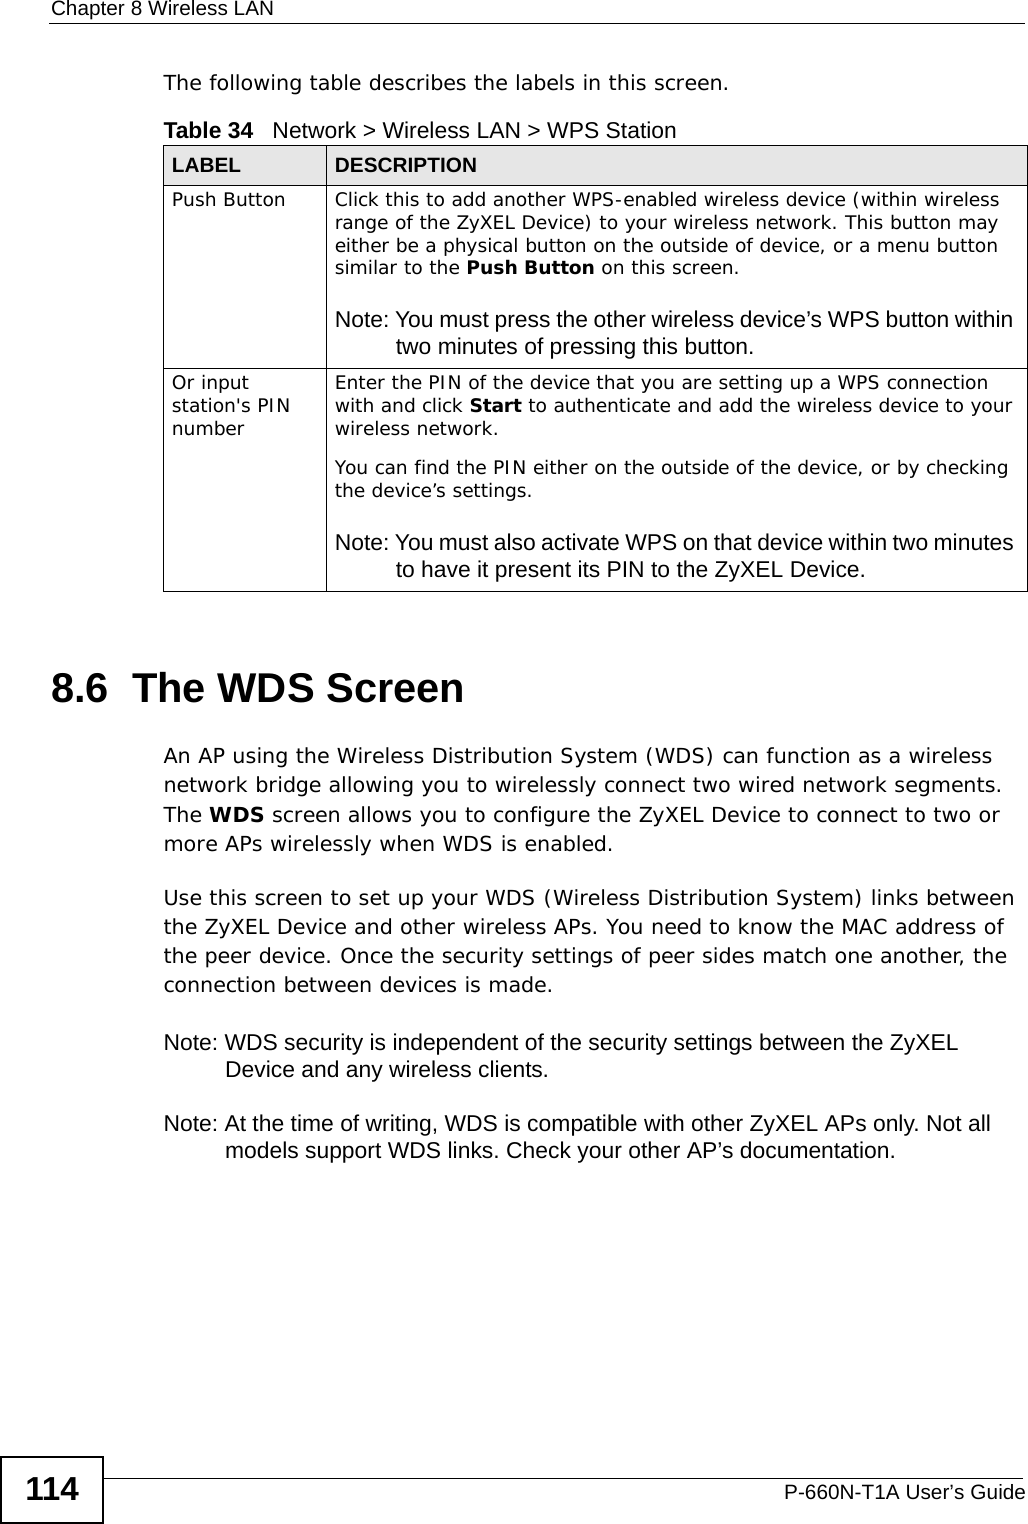 Chapter 8 Wireless LANP-660N-T1A User’s Guide114The following table describes the labels in this screen.8.6  The WDS ScreenAn AP using the Wireless Distribution System (WDS) can function as a wireless network bridge allowing you to wirelessly connect two wired network segments. The WDS screen allows you to configure the ZyXEL Device to connect to two or more APs wirelessly when WDS is enabled. Use this screen to set up your WDS (Wireless Distribution System) links between the ZyXEL Device and other wireless APs. You need to know the MAC address of the peer device. Once the security settings of peer sides match one another, the connection between devices is made. Note: WDS security is independent of the security settings between the ZyXEL Device and any wireless clients.Note: At the time of writing, WDS is compatible with other ZyXEL APs only. Not all models support WDS links. Check your other AP’s documentation.Table 34   Network &gt; Wireless LAN &gt; WPS StationLABEL DESCRIPTIONPush Button Click this to add another WPS-enabled wireless device (within wireless range of the ZyXEL Device) to your wireless network. This button may either be a physical button on the outside of device, or a menu button similar to the Push Button on this screen.Note: You must press the other wireless device’s WPS button within two minutes of pressing this button.Or input station&apos;s PIN numberEnter the PIN of the device that you are setting up a WPS connection with and click Start to authenticate and add the wireless device to your wireless network.You can find the PIN either on the outside of the device, or by checking the device’s settings.Note: You must also activate WPS on that device within two minutes to have it present its PIN to the ZyXEL Device.